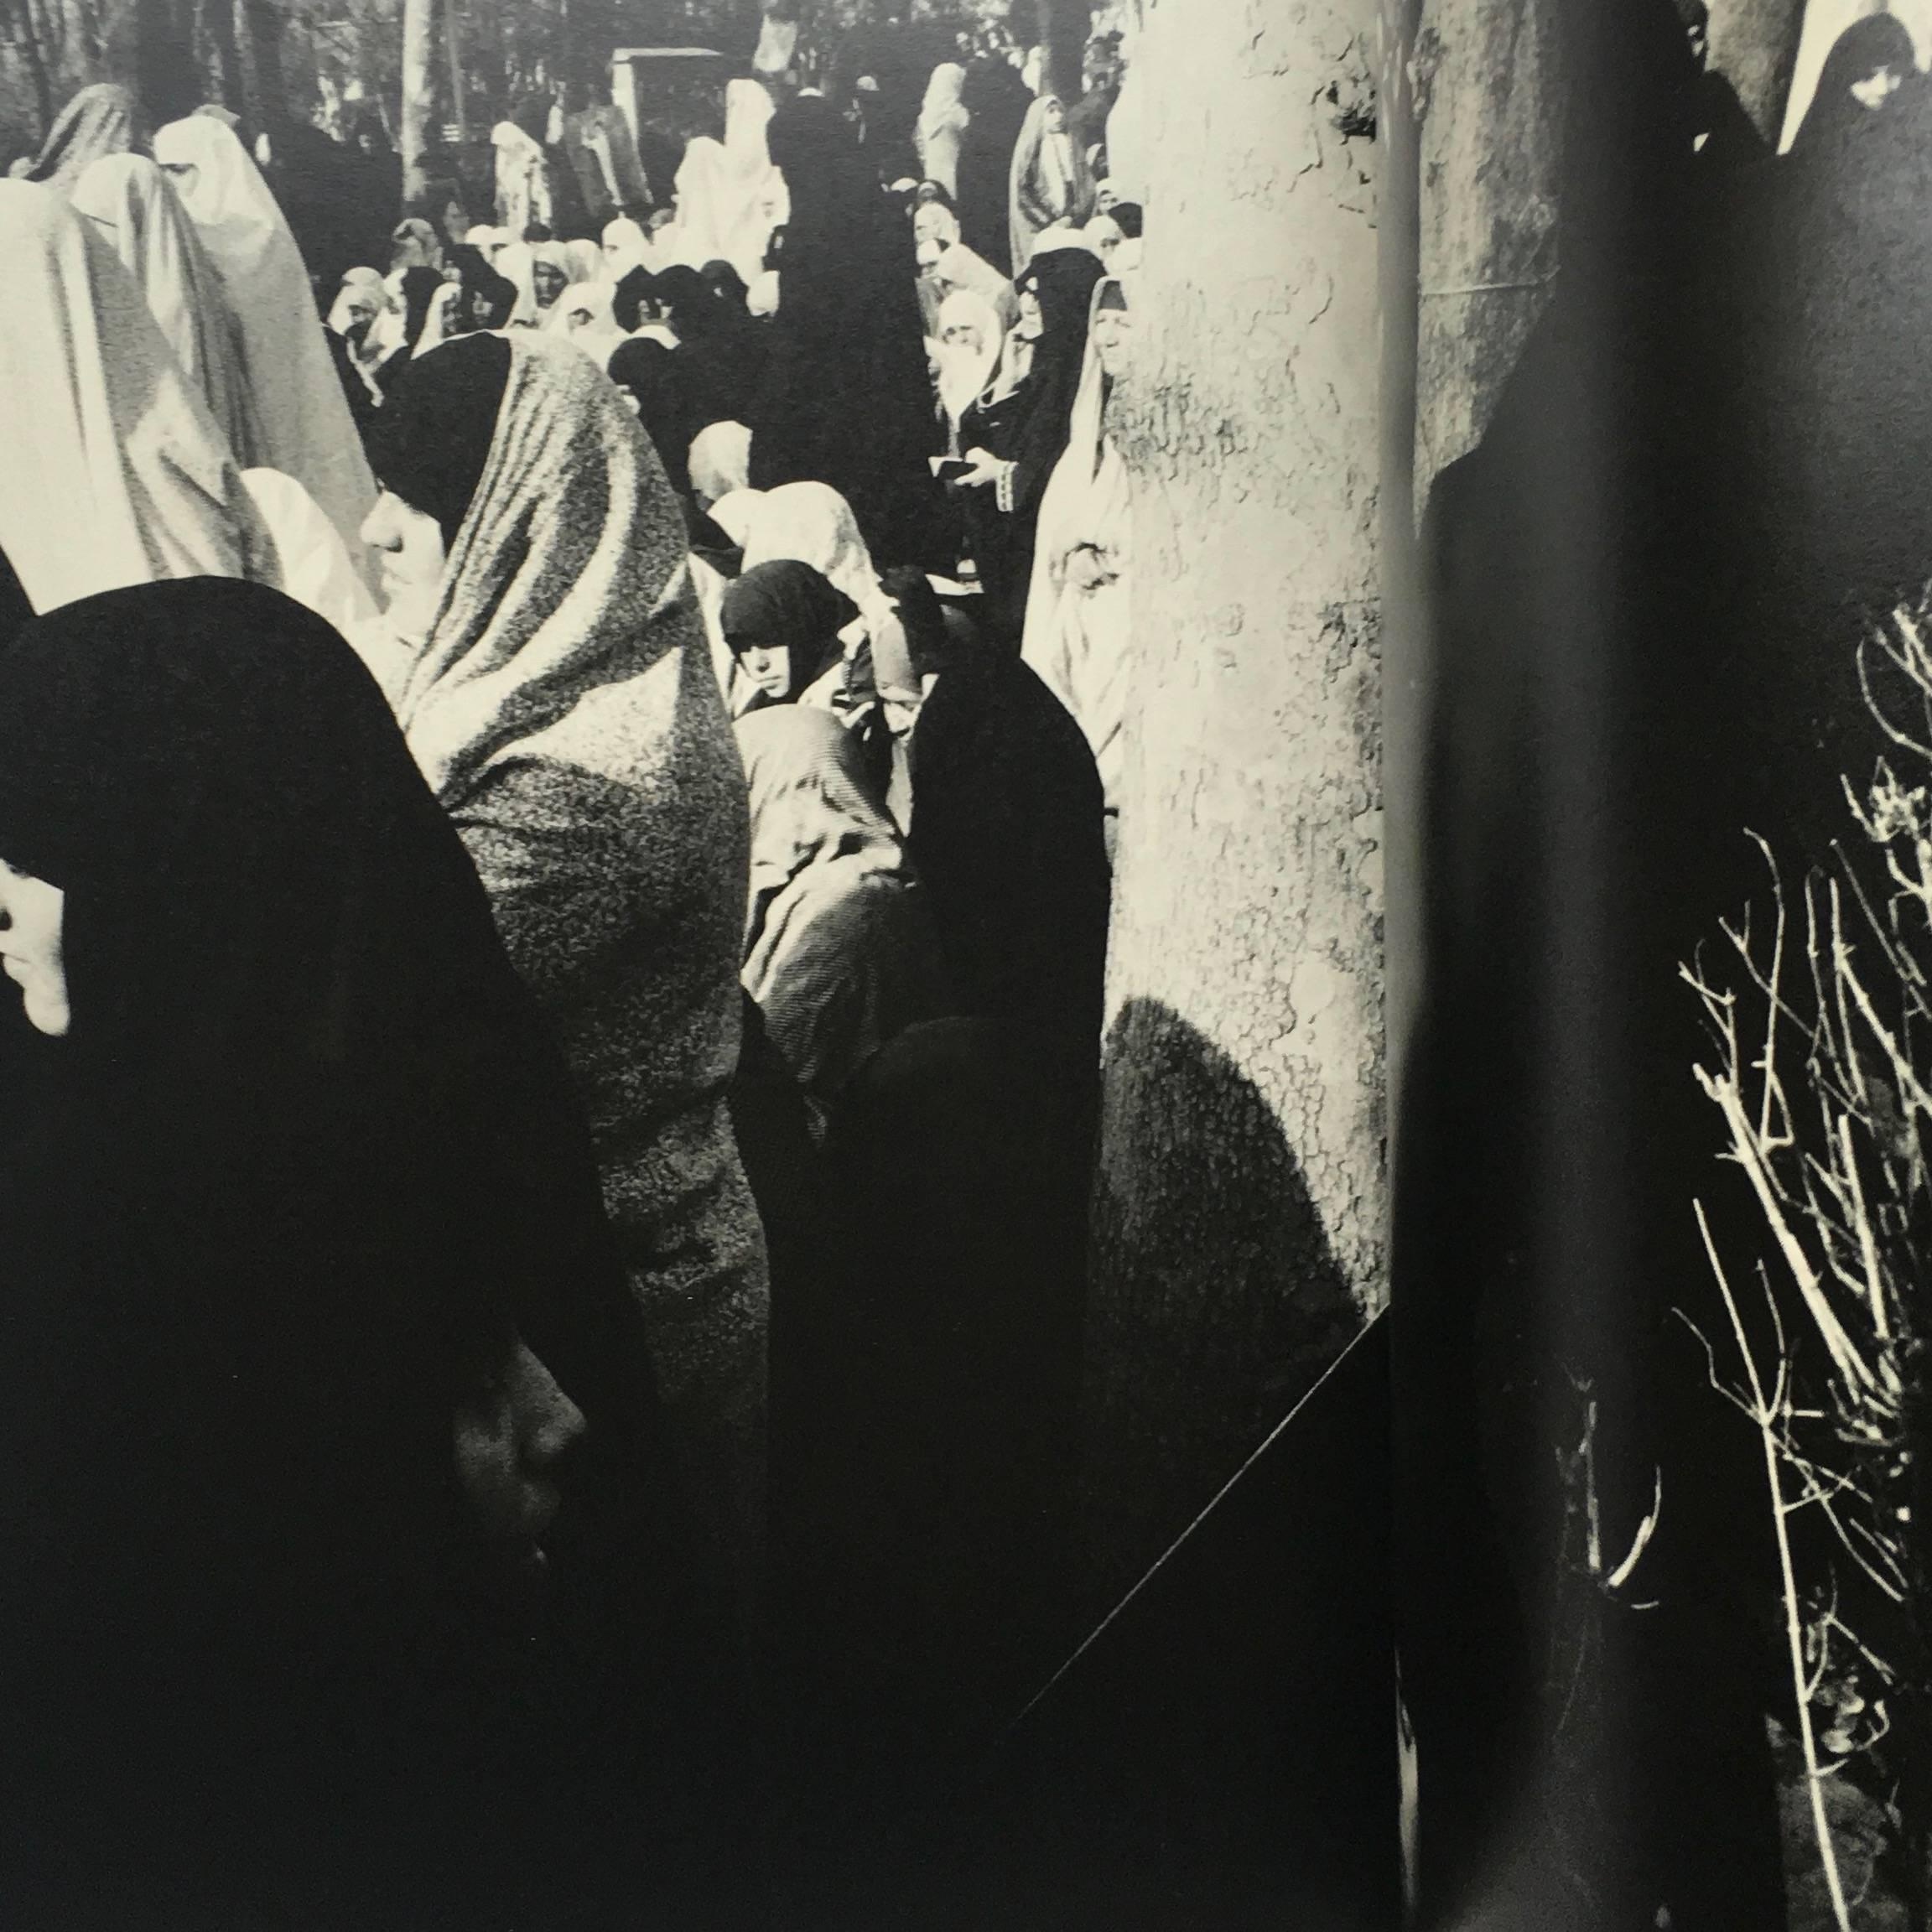 First edition, soft cover, published by Contrejour, 1st edition 1984.

This incredibly important and beautifully designed publication presents a photo essay built up of photographs taken by Peress in Iran during a five-week period, between